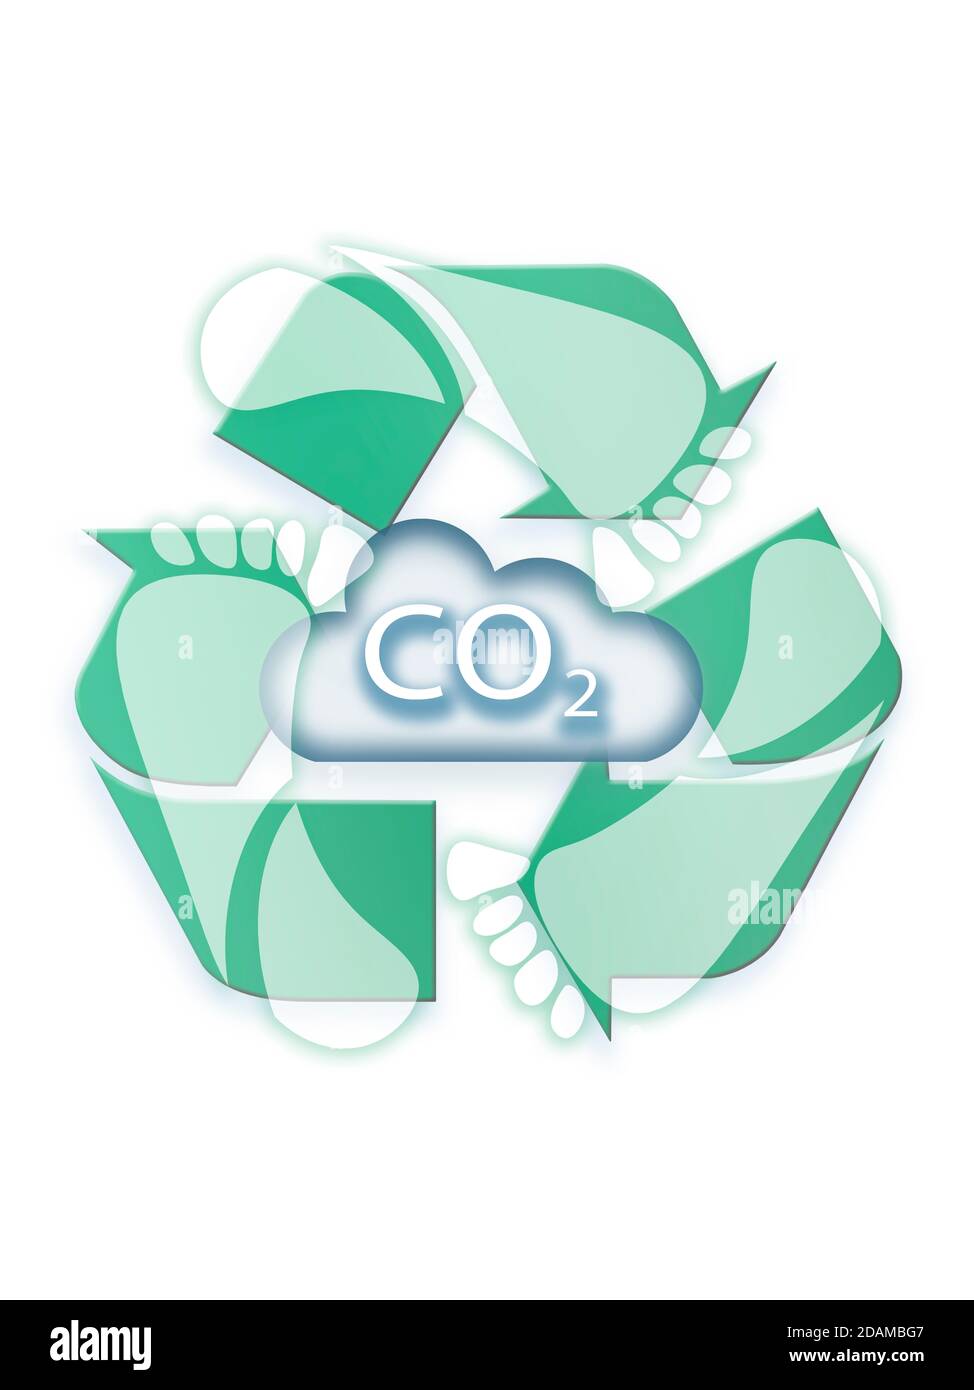 Carbon cloud with recycling symbol, illustration. Stock Photo